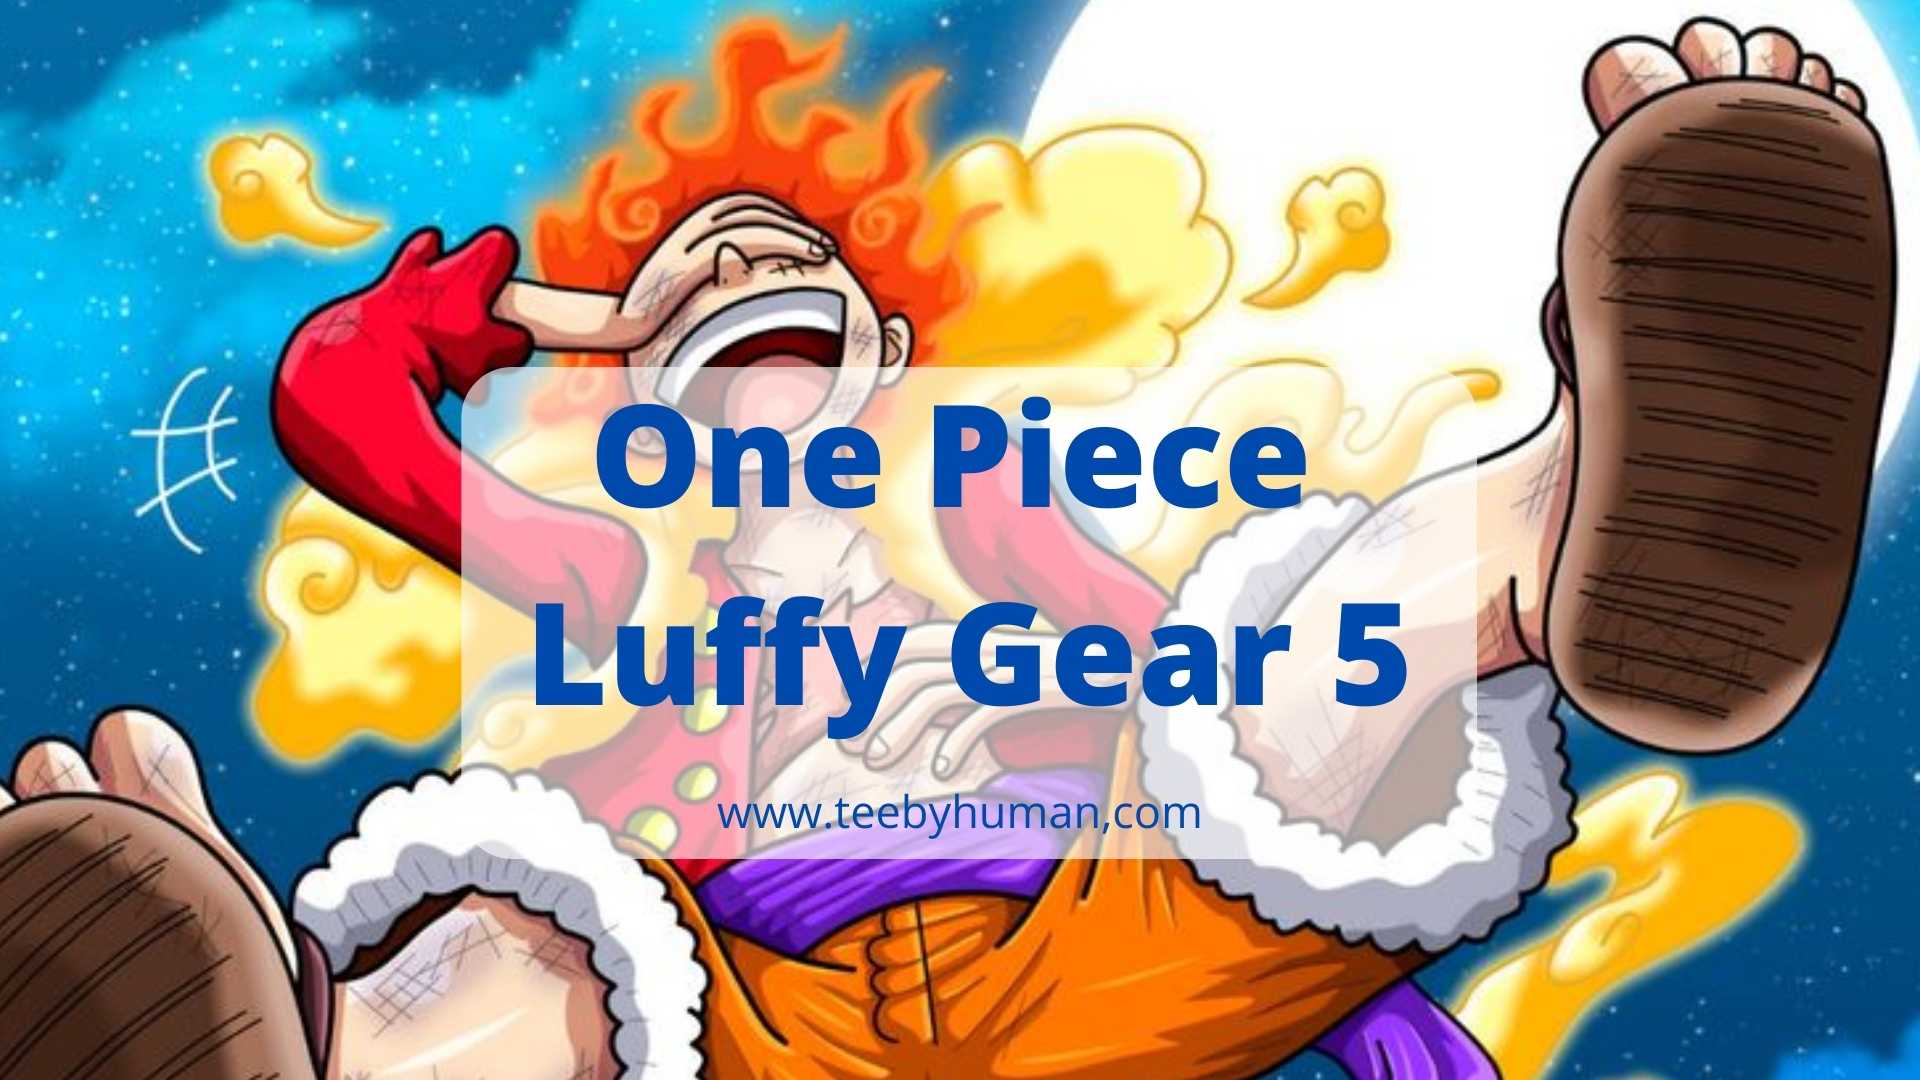 One Piece' Fans, Knowing That Luffy's Gear 5 Exists Does Not Spoil Gear 5